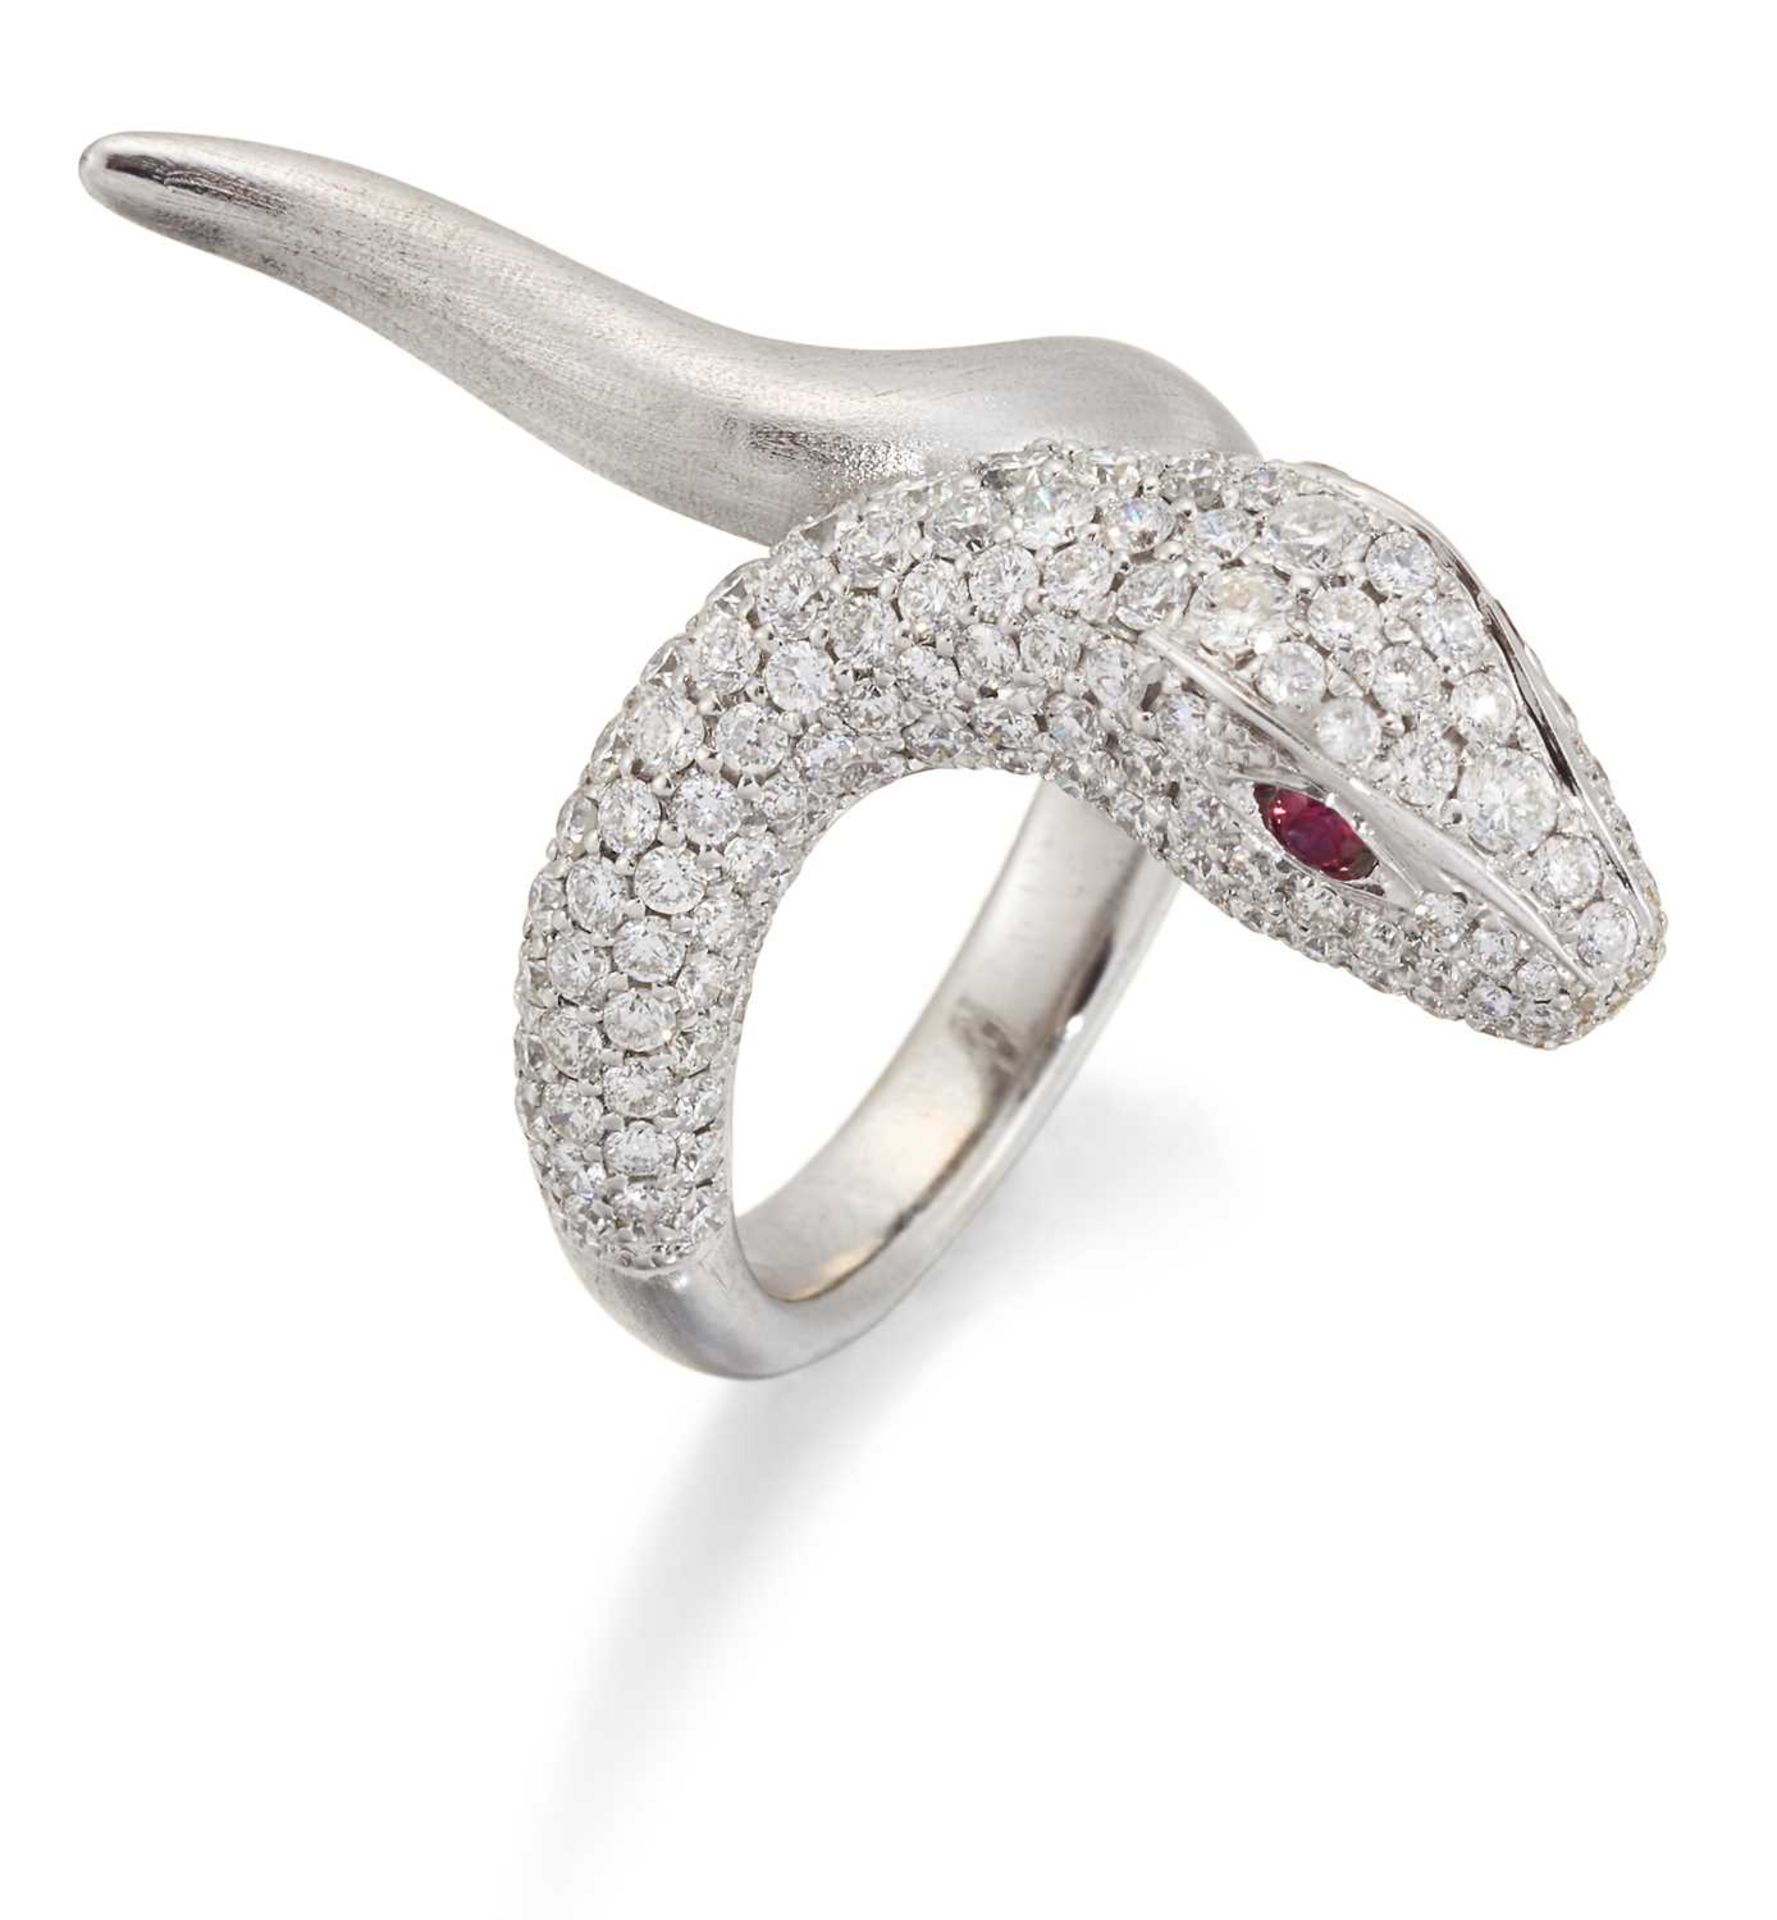 A RUBY AND DIAMOND SNAKE RING